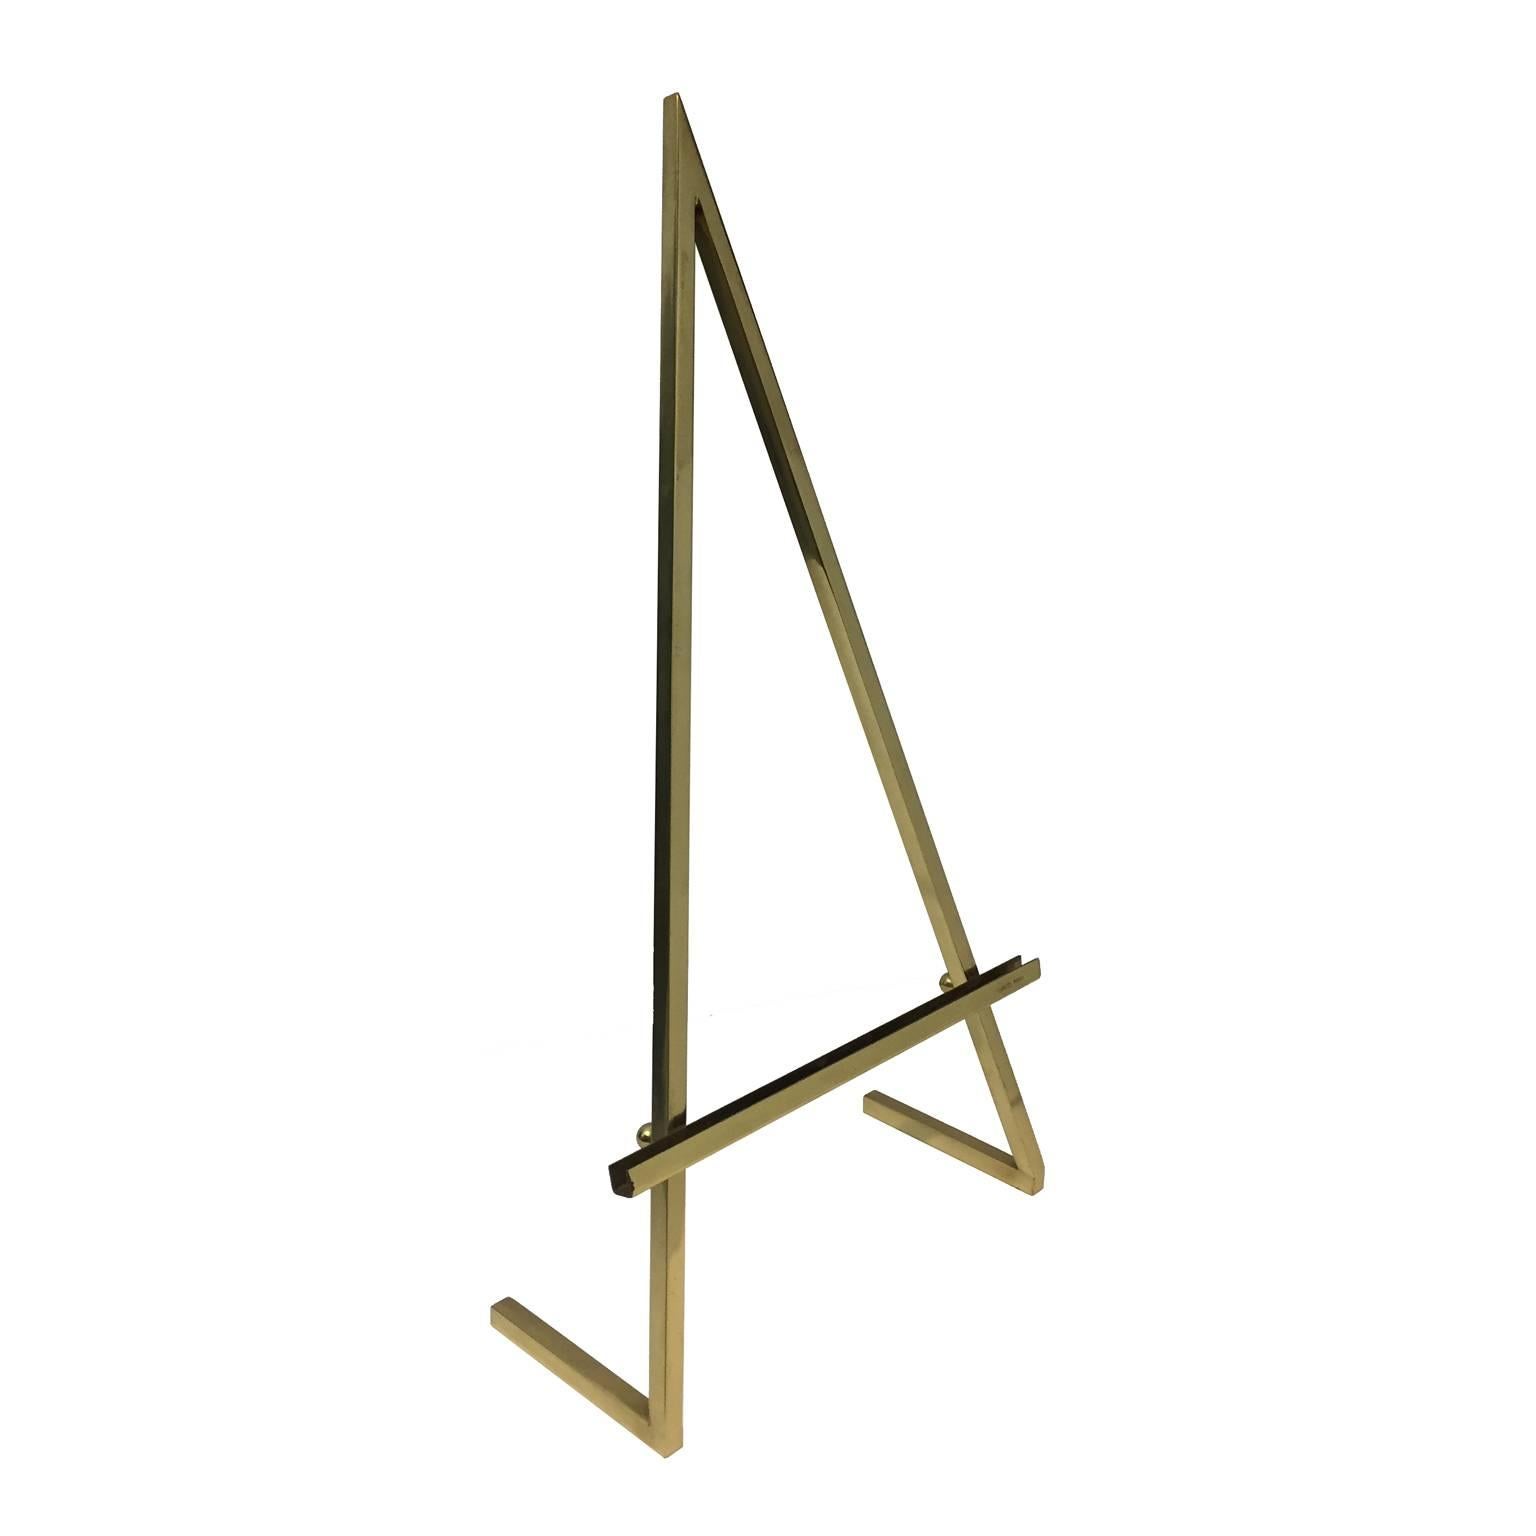 Brass tabletop easel. Stamped 